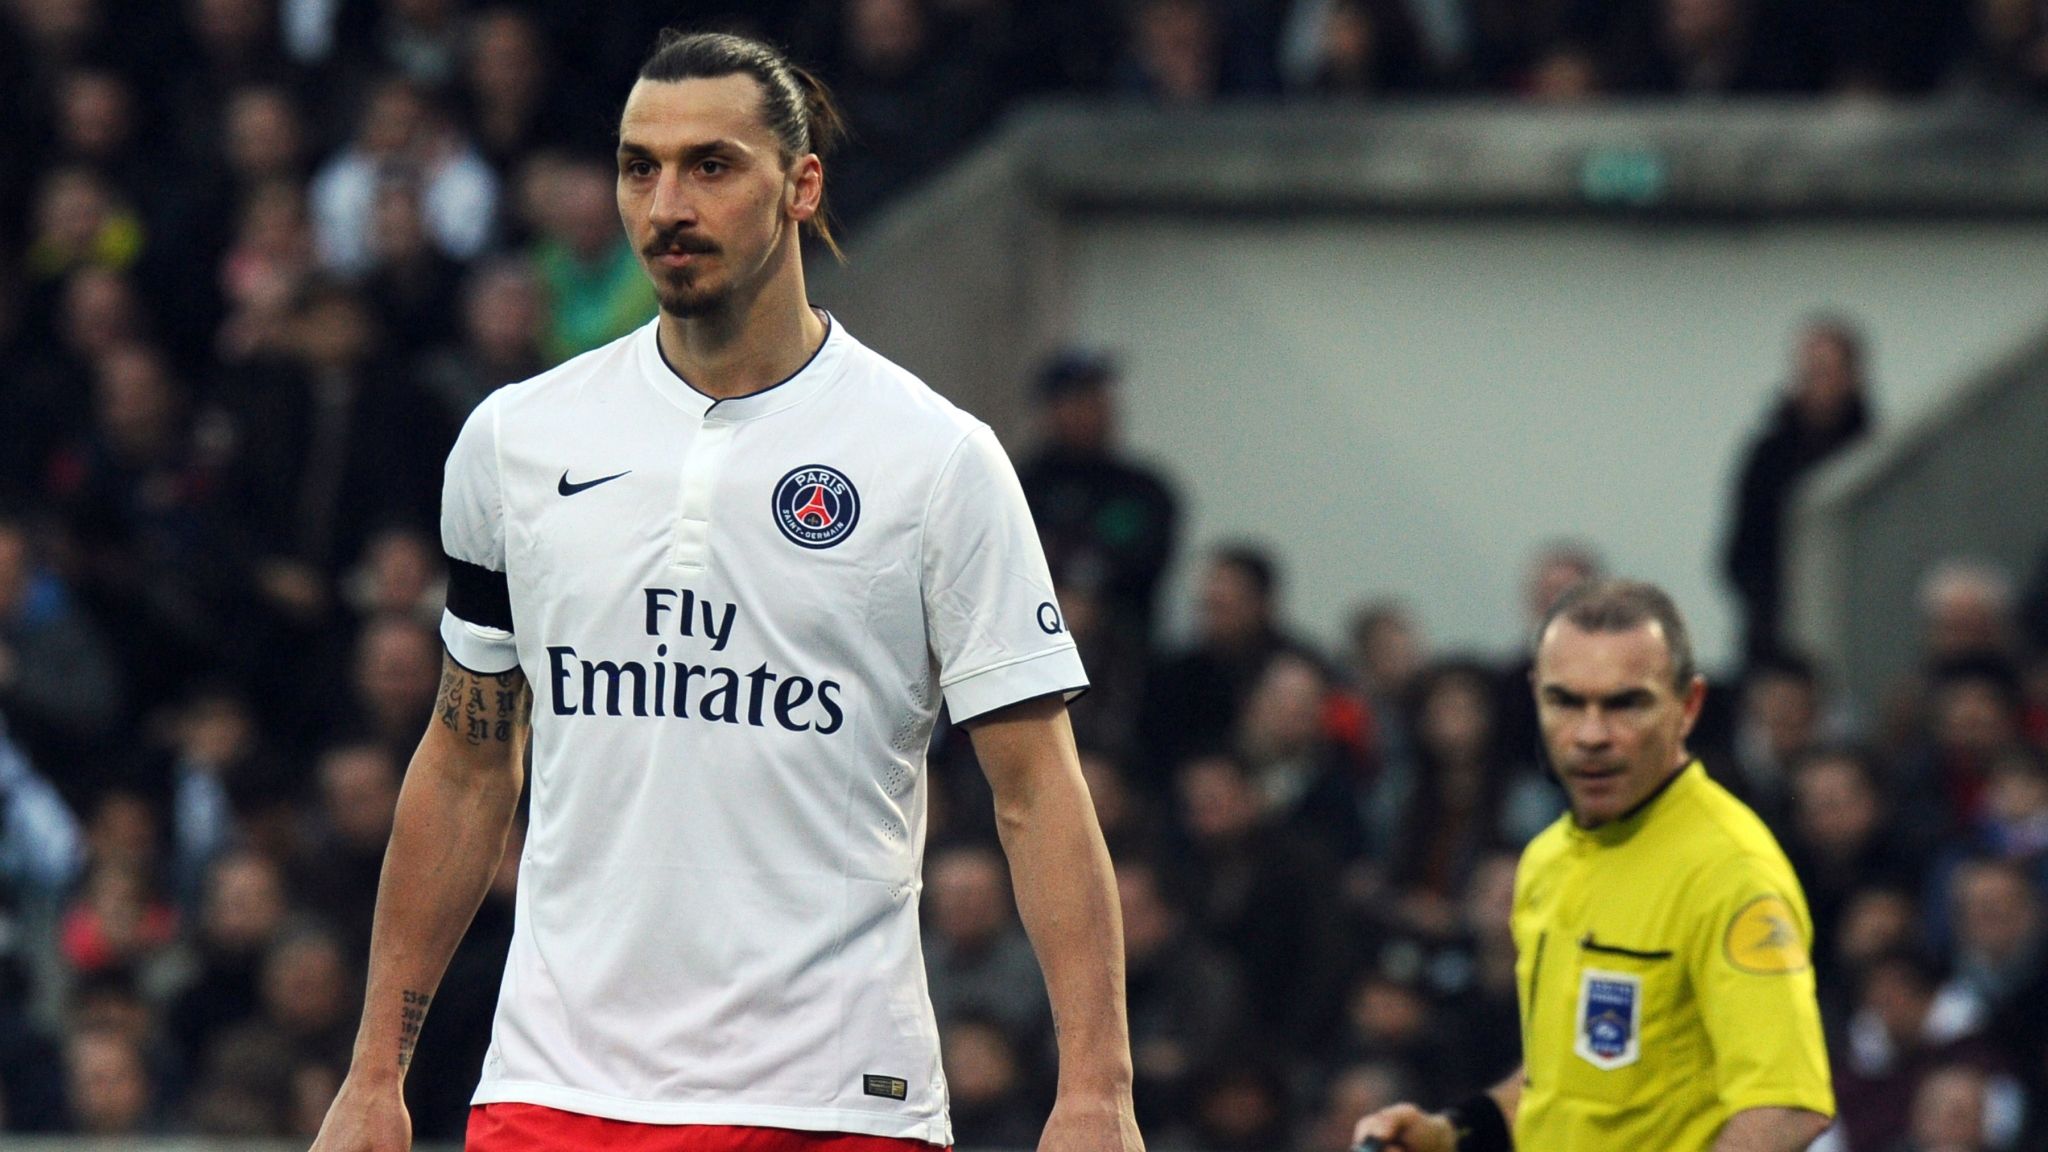 PSG's Zlatan Ibrahimovic told to leave France after Bordeaux | Football News | Sky Sports